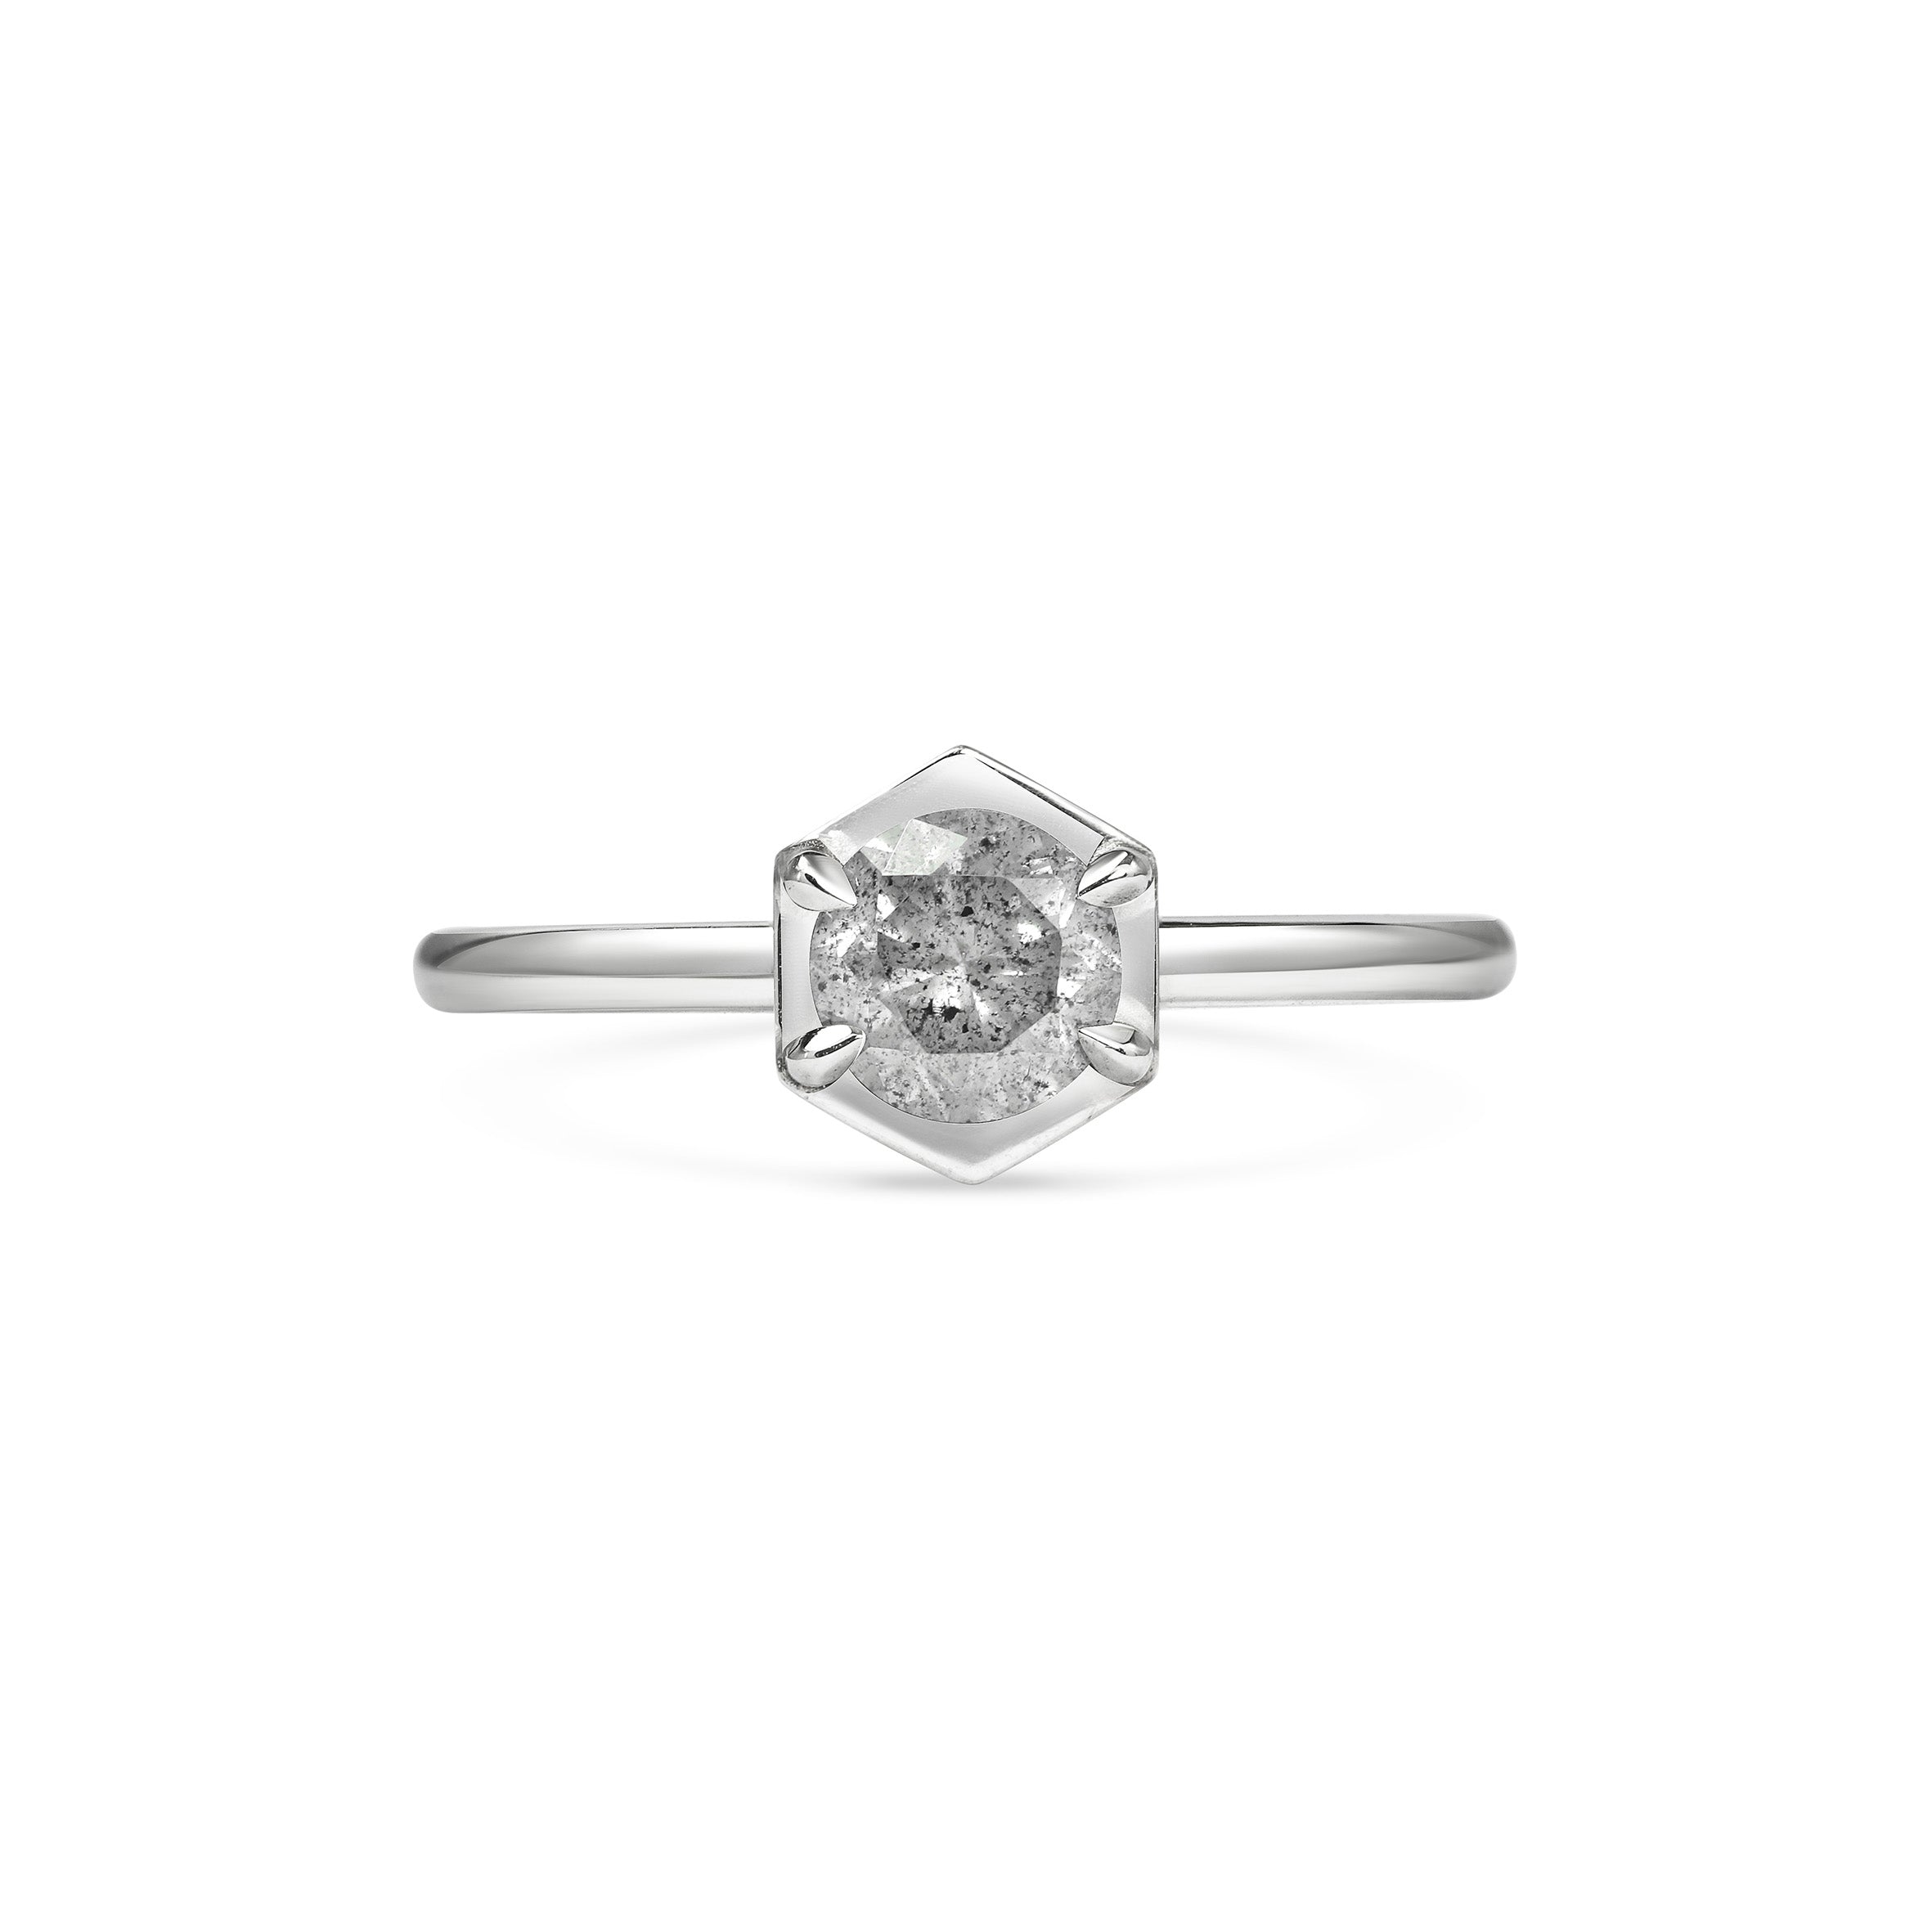 The Aquila Ring - Light Grey by East London jeweller Rachel Boston | Discover our collections of unique and timeless engagement rings, wedding rings, and modern fine jewellery.